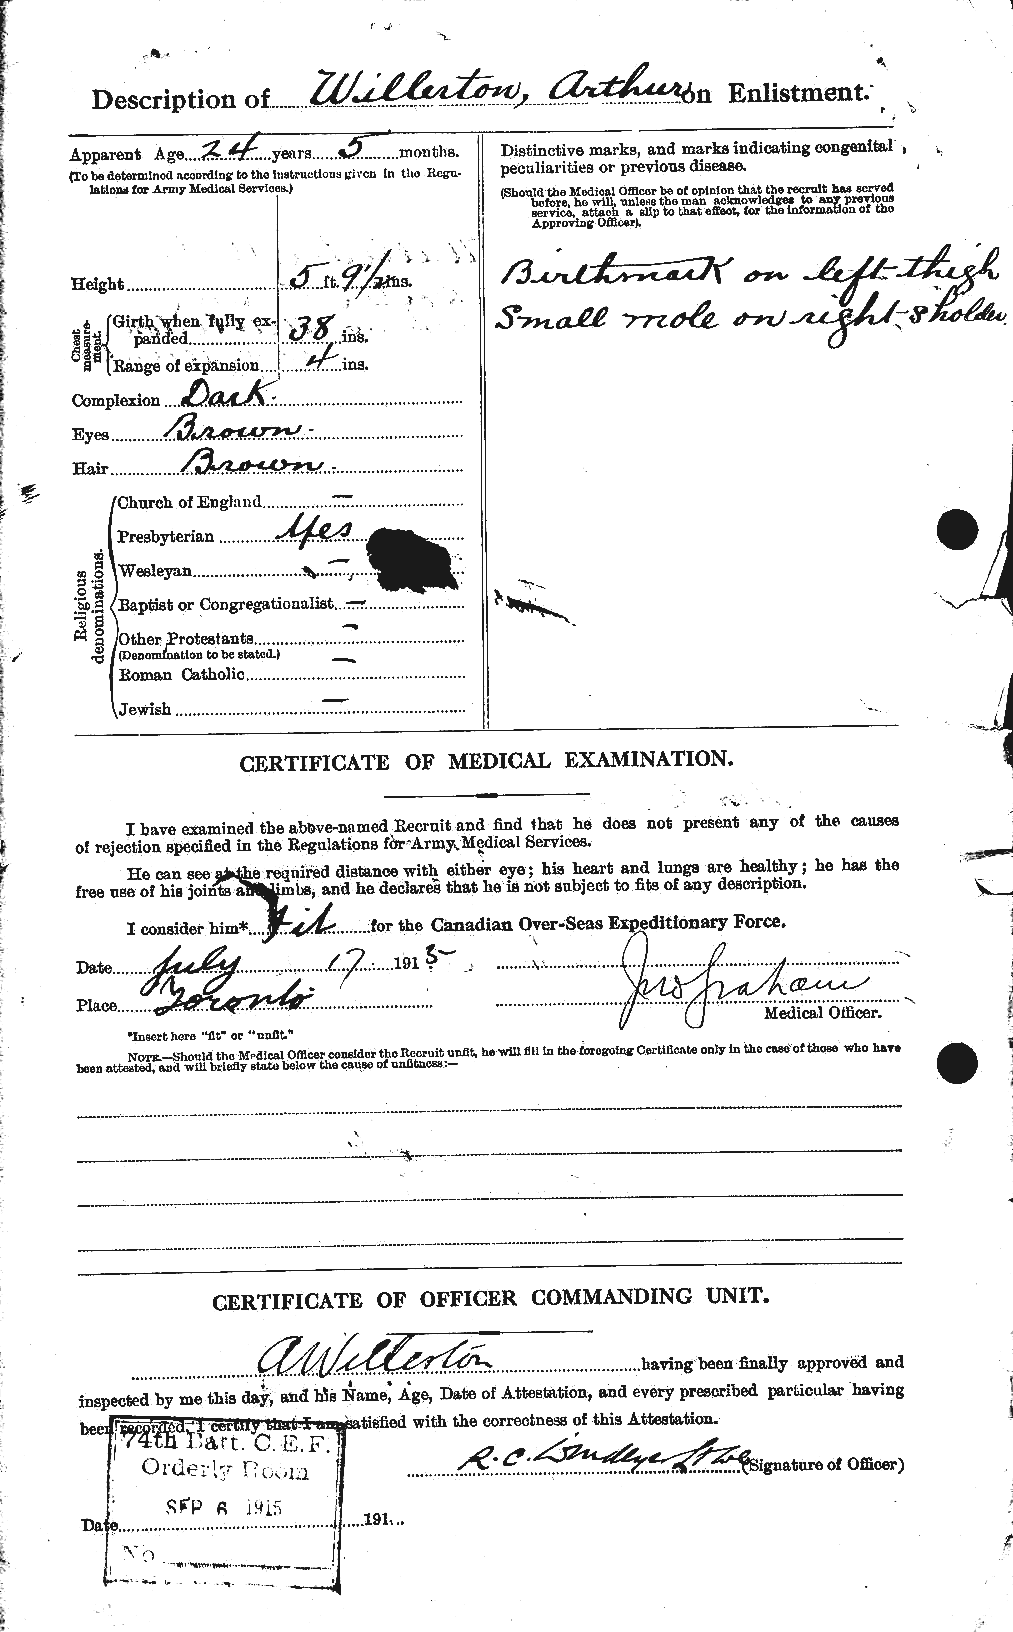 Personnel Records of the First World War - CEF 675260b